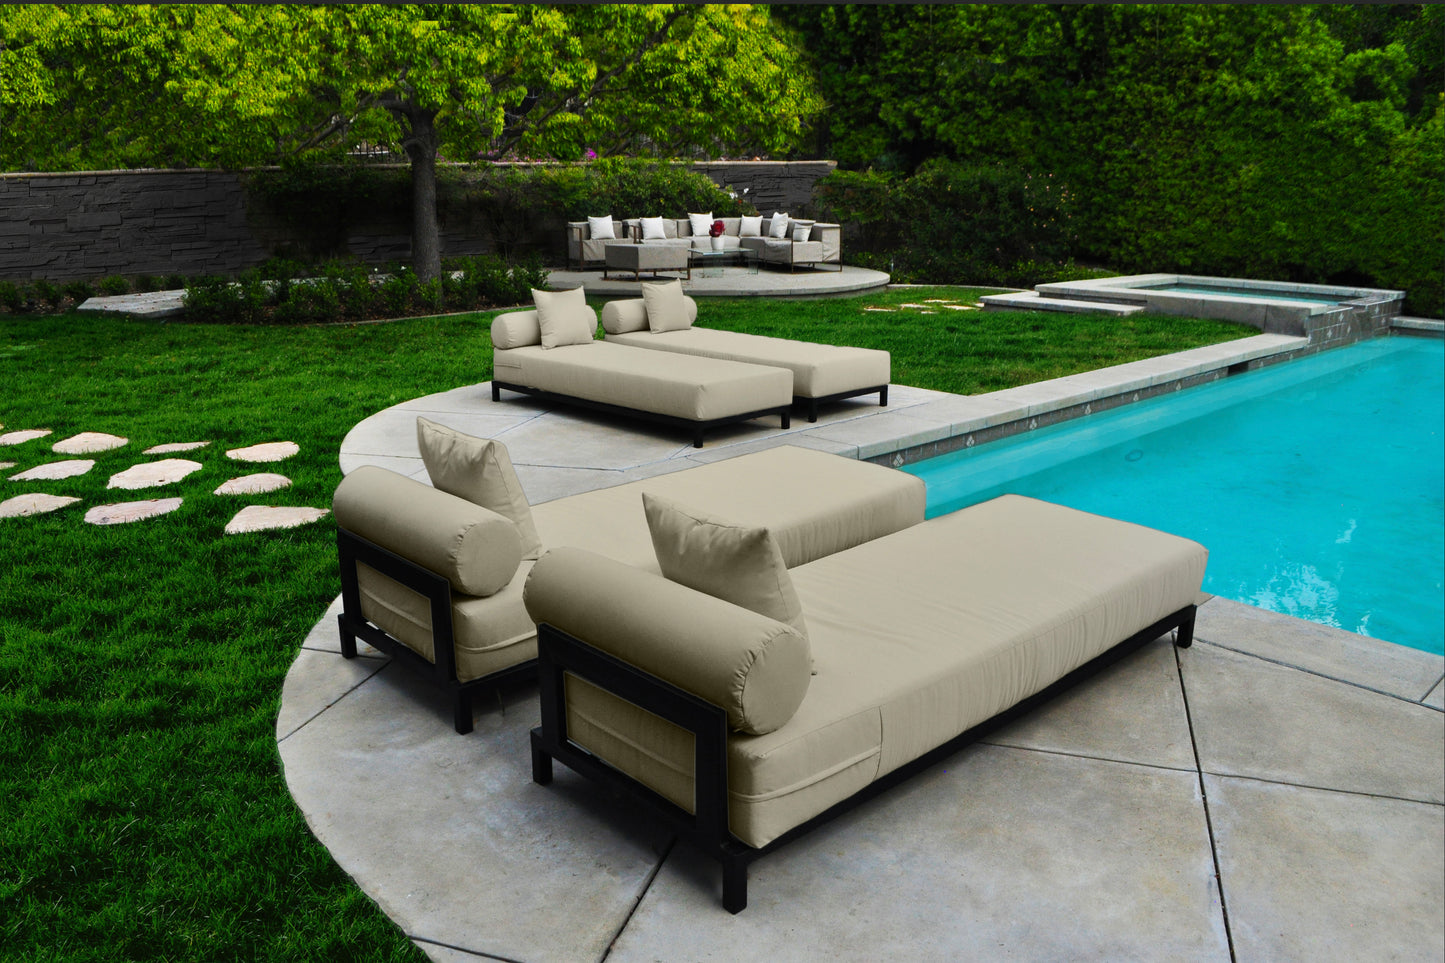 Volantes Outdoor Beige Chaise Loungers (Set of 4)